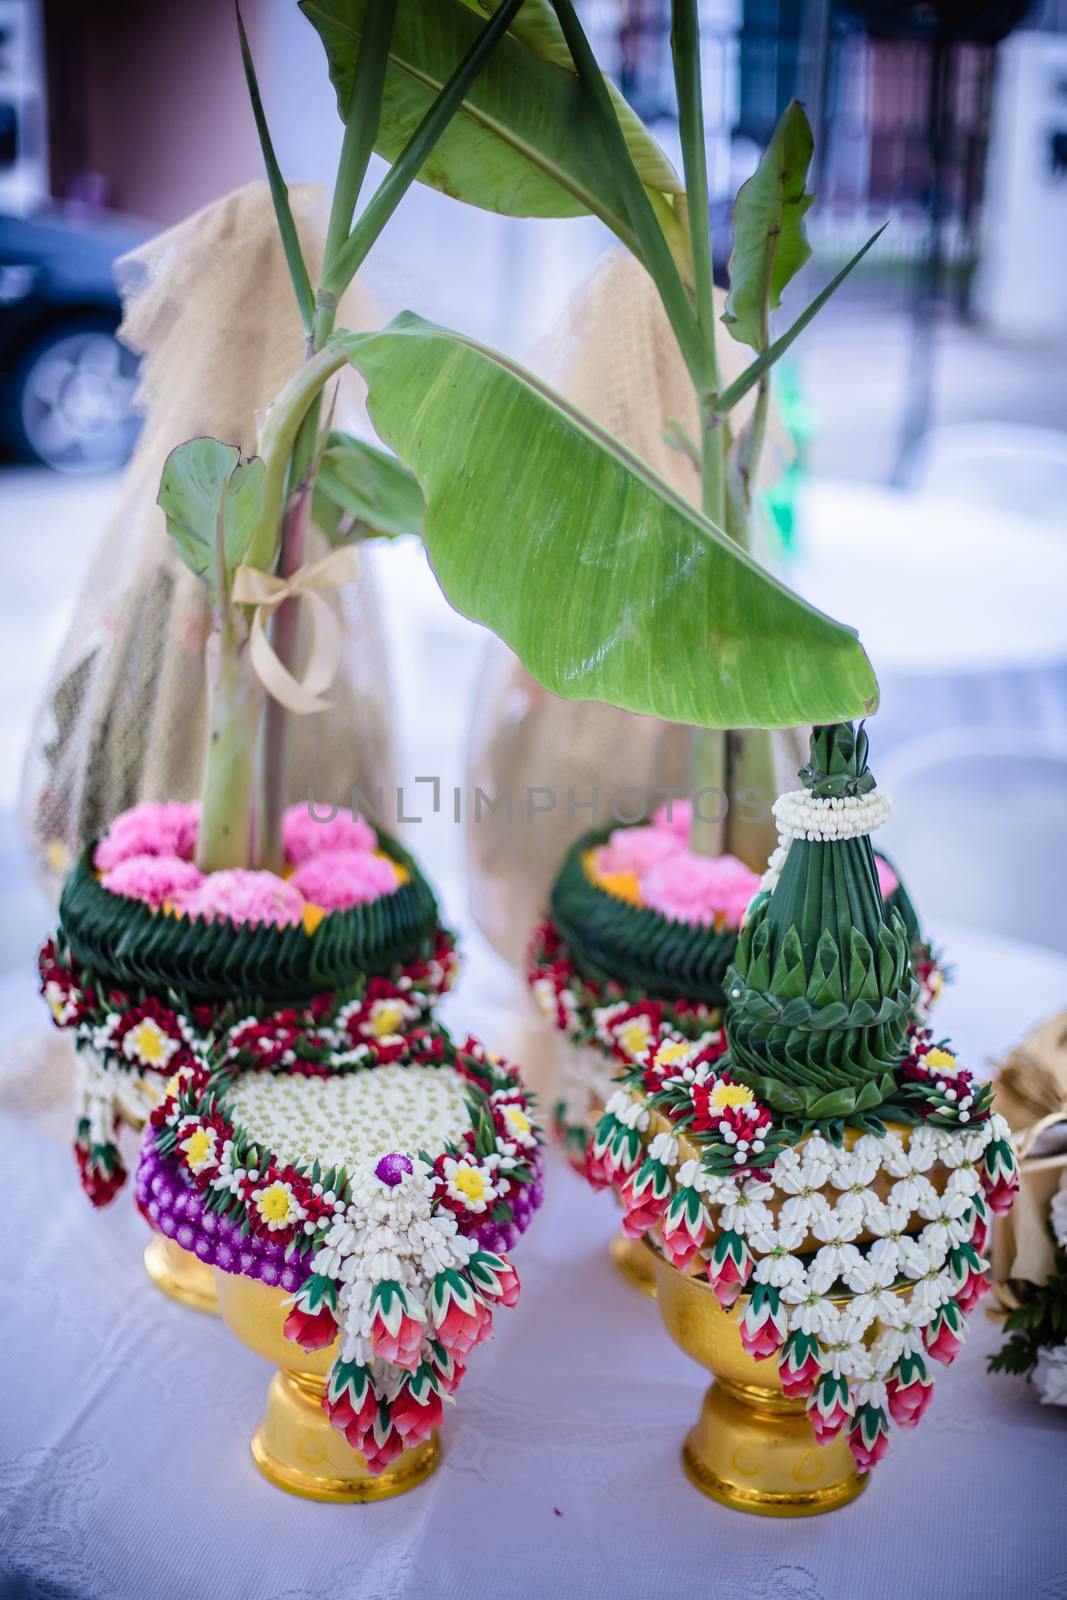 Flower tray with banana tree for Thai traditional wedding by psodaz